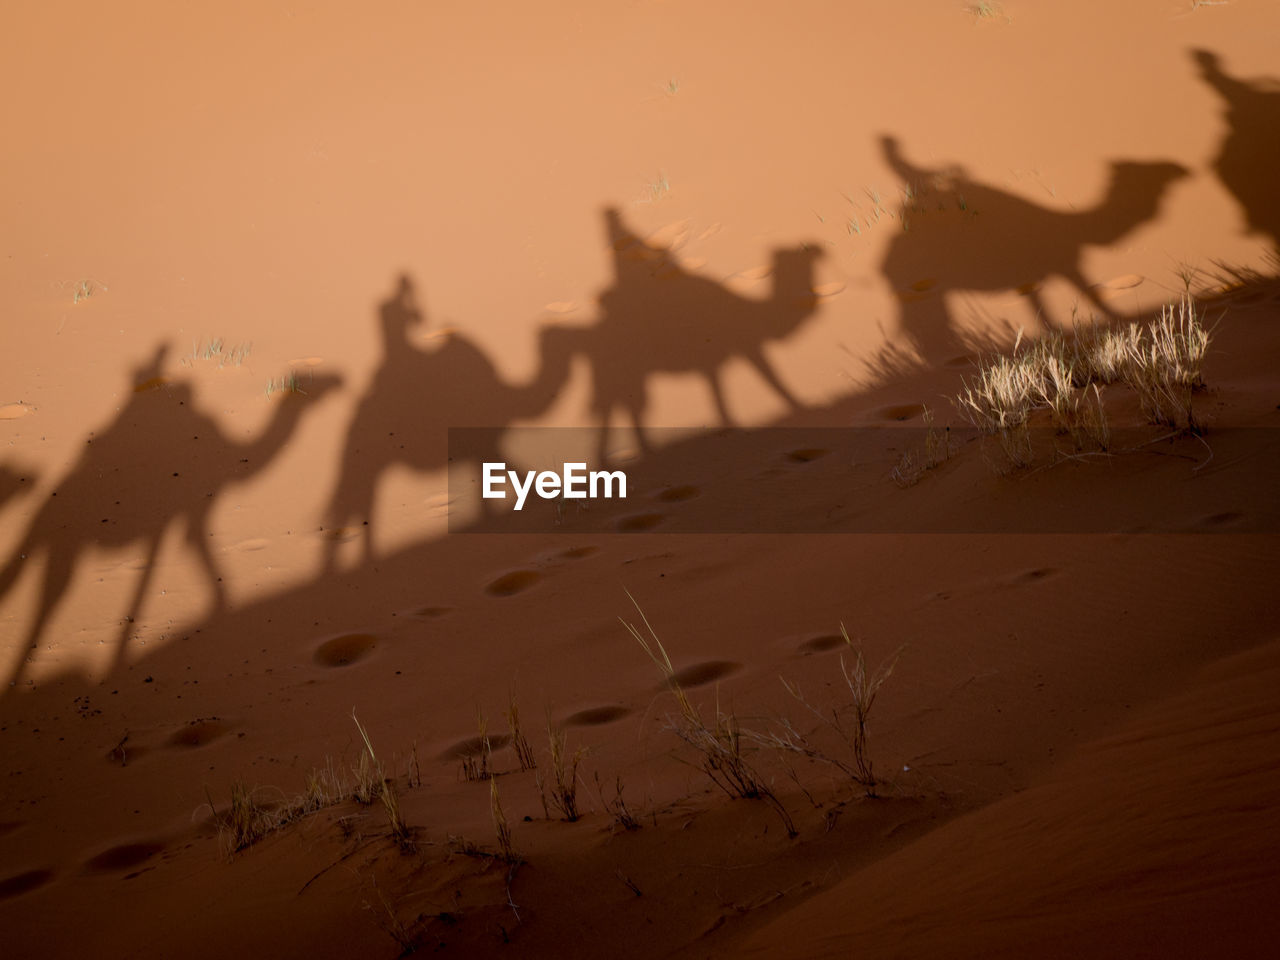 Shadow of people riding camels at desert